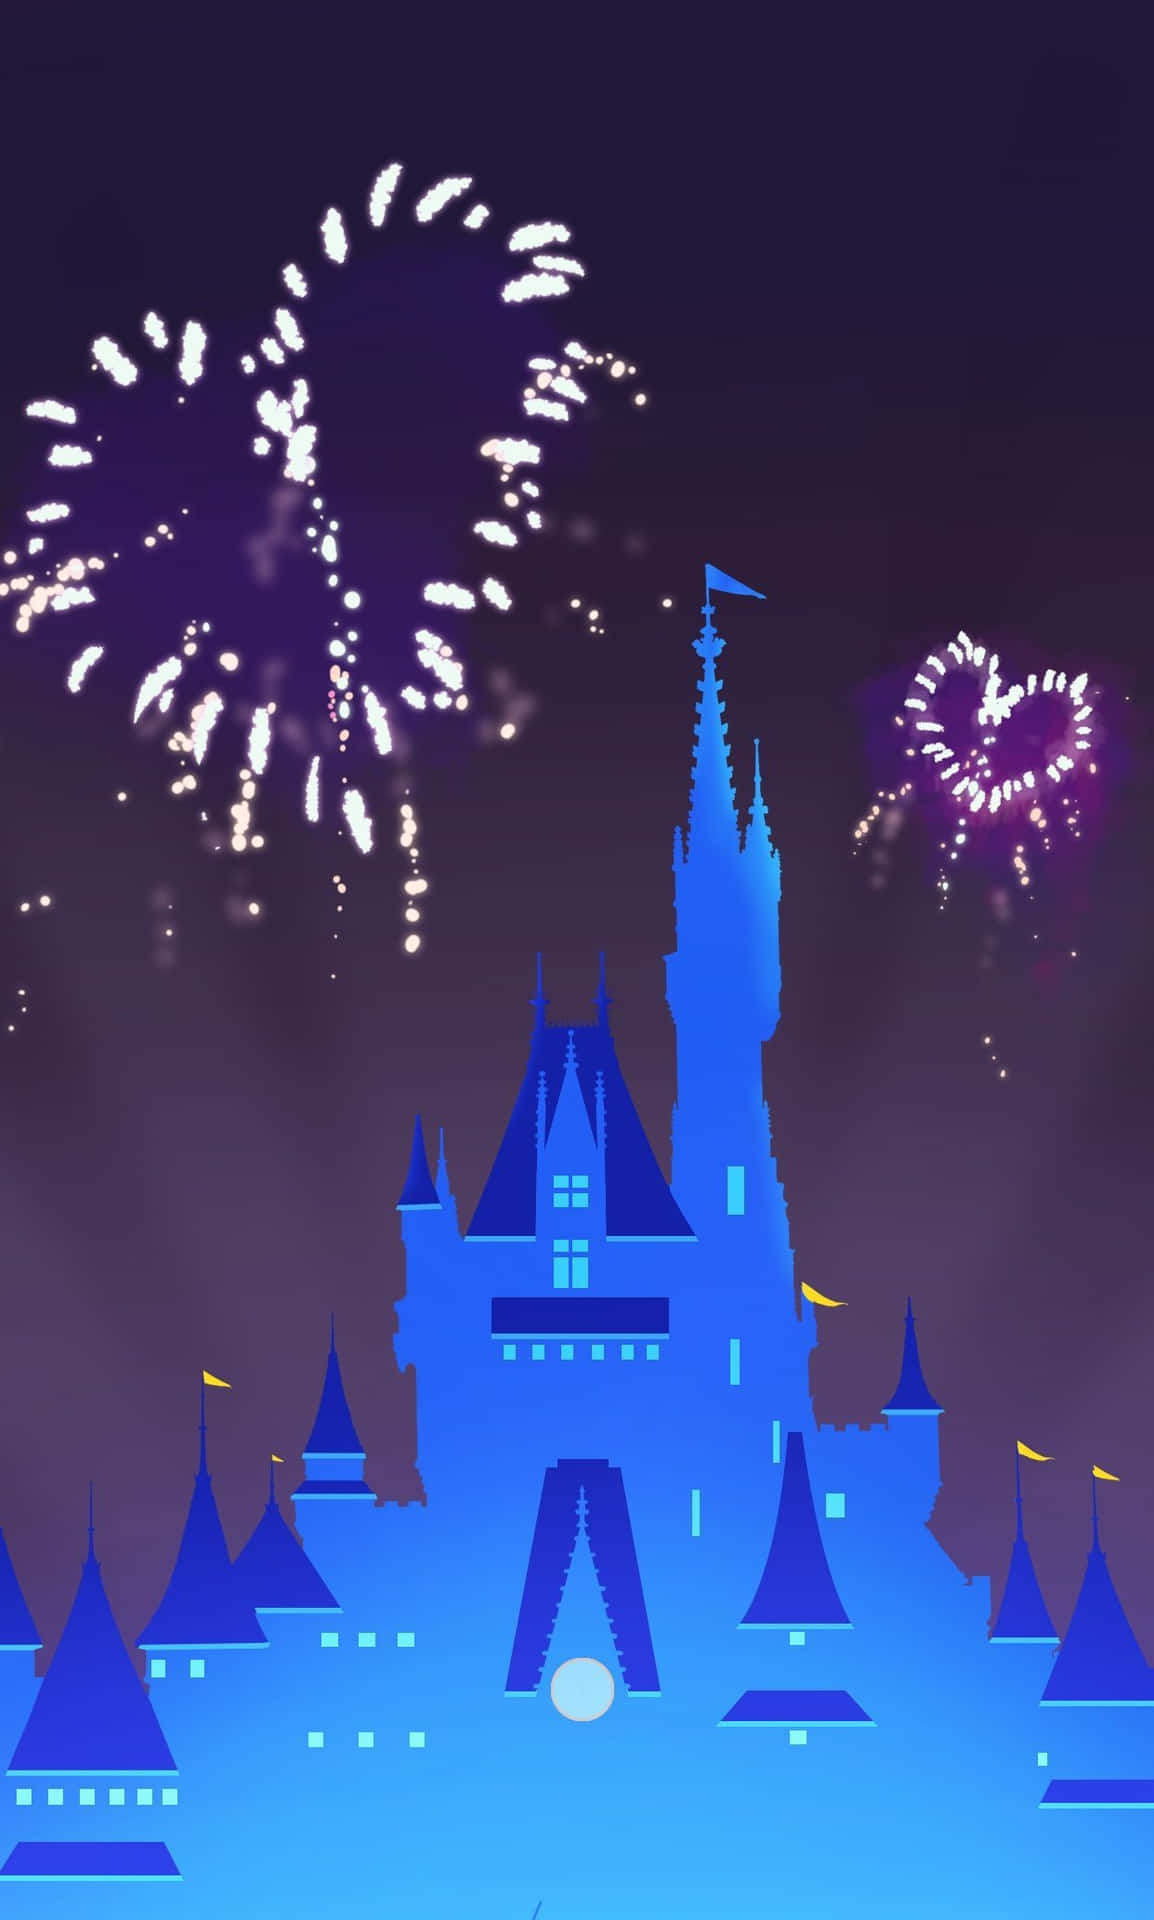 Disney Castle With Fireworks In The Sky Wallpaper